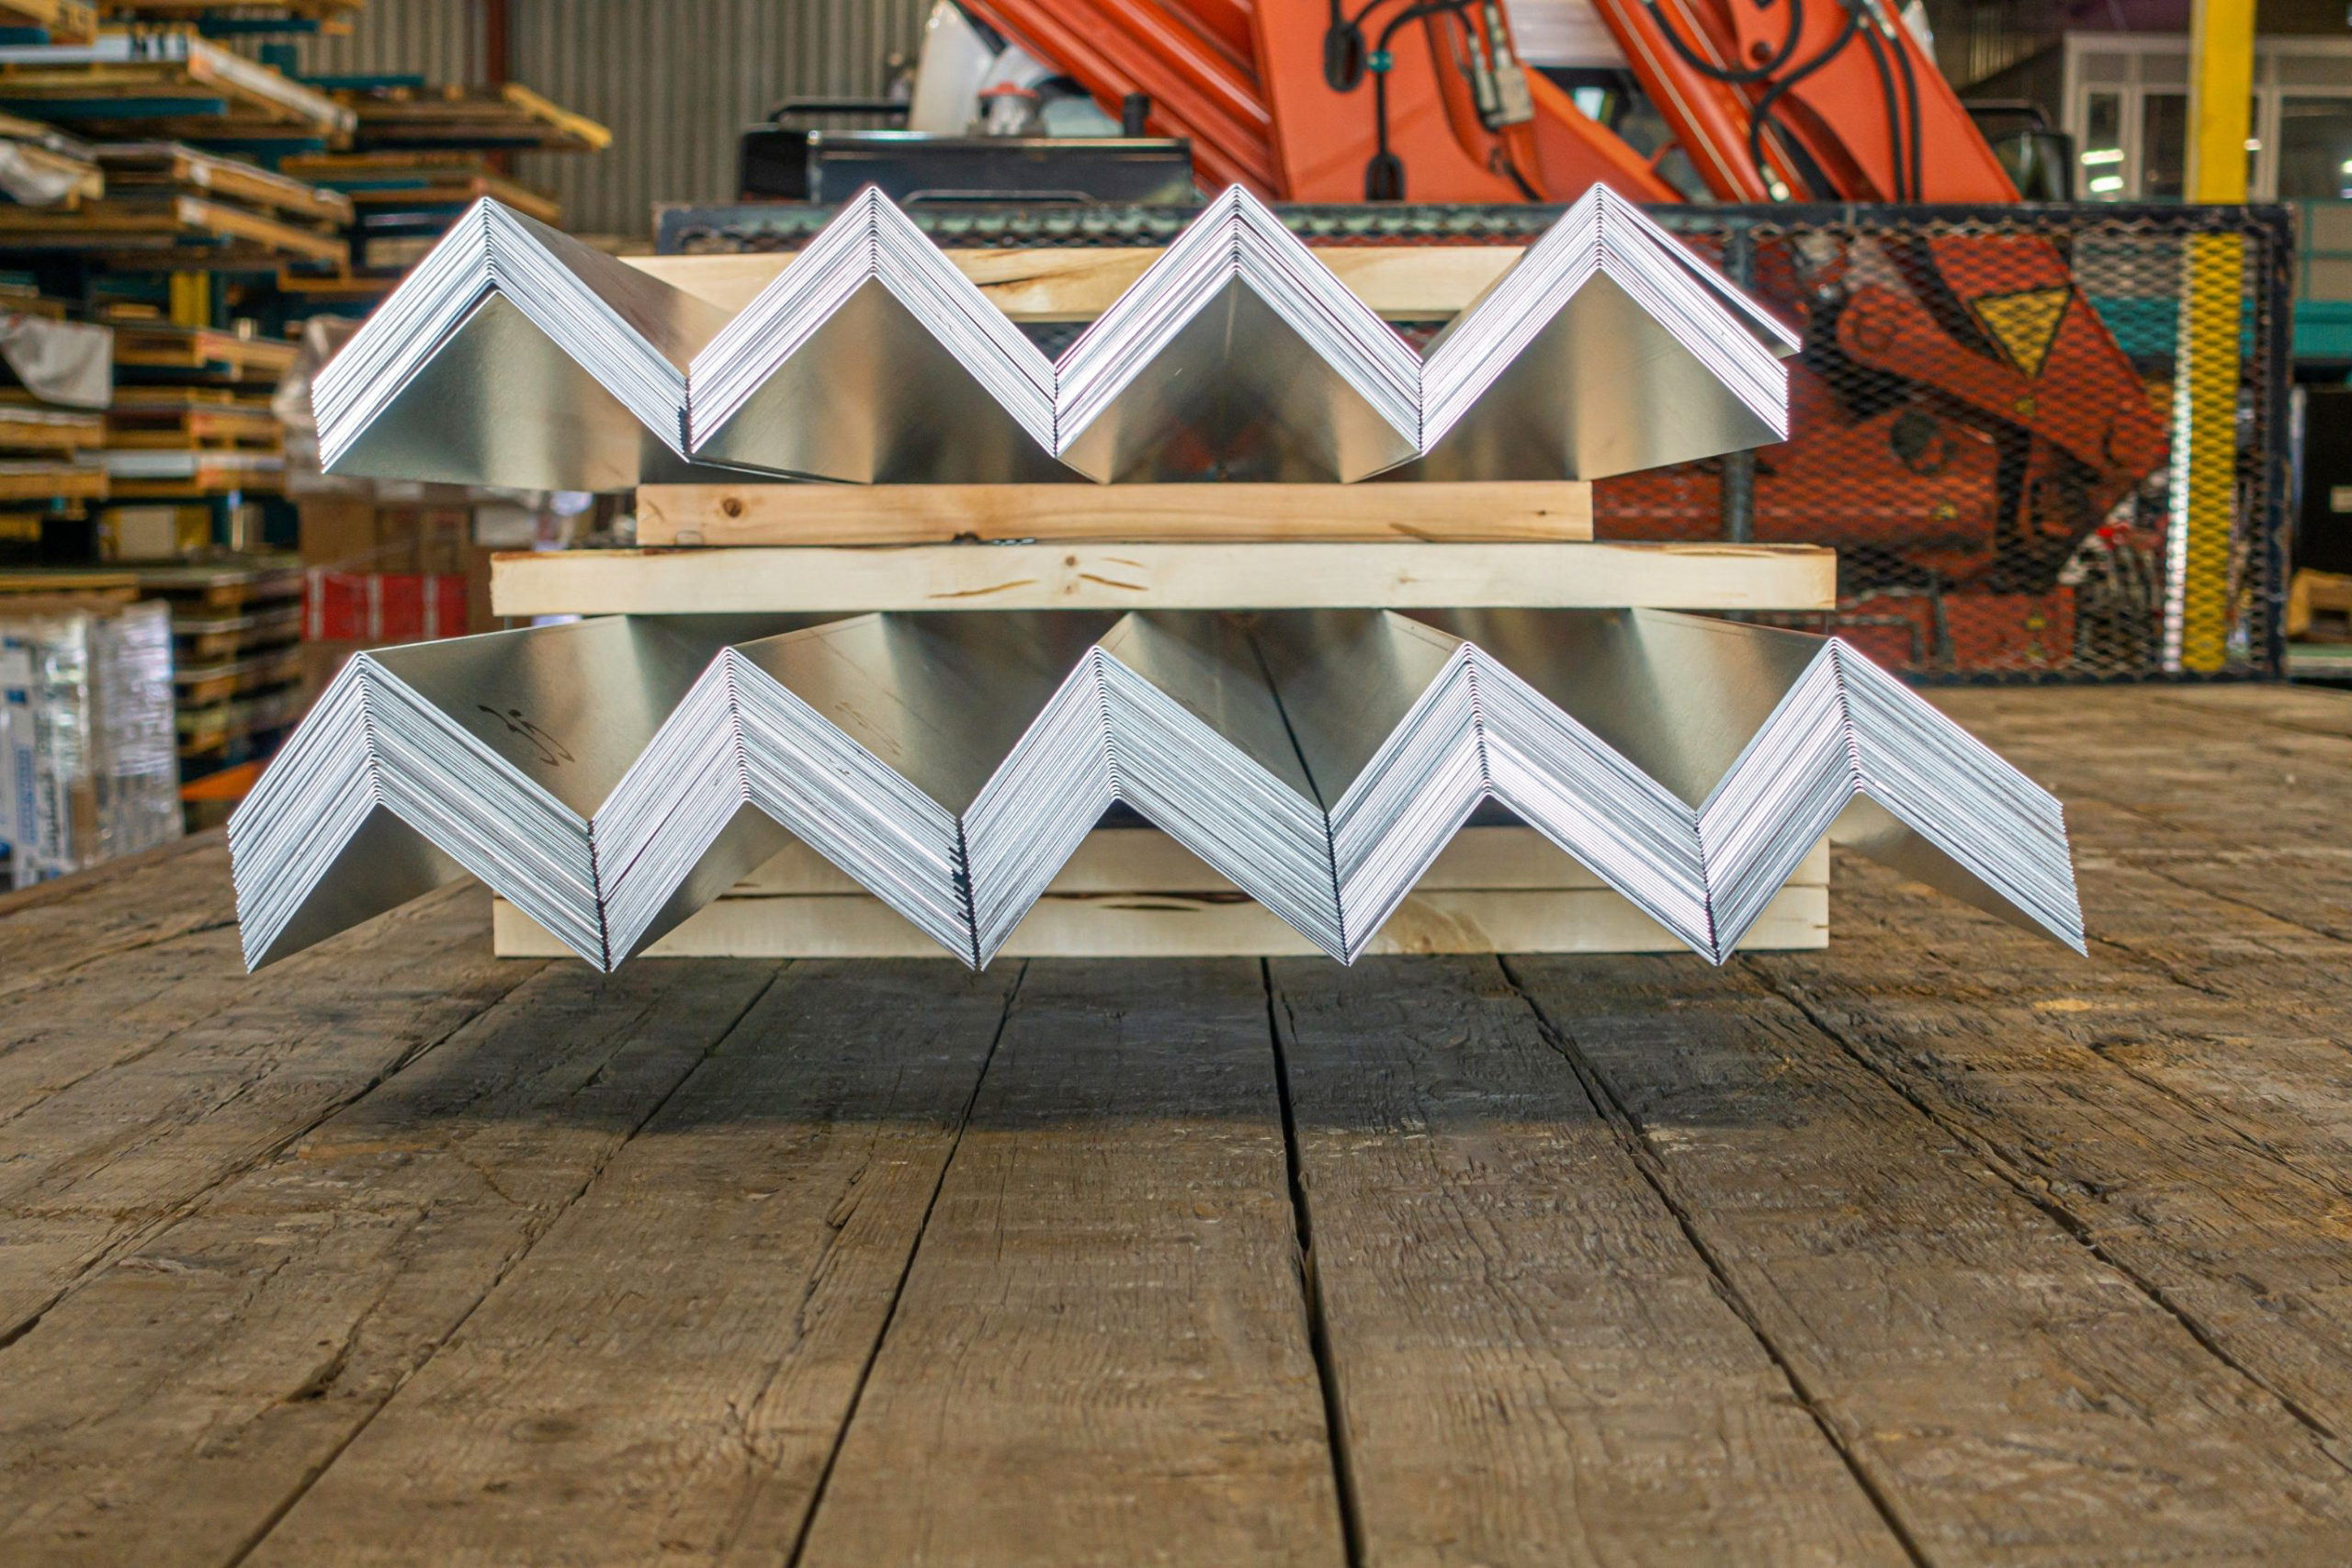 Newly-fabricated roof flashing stacked in a factory